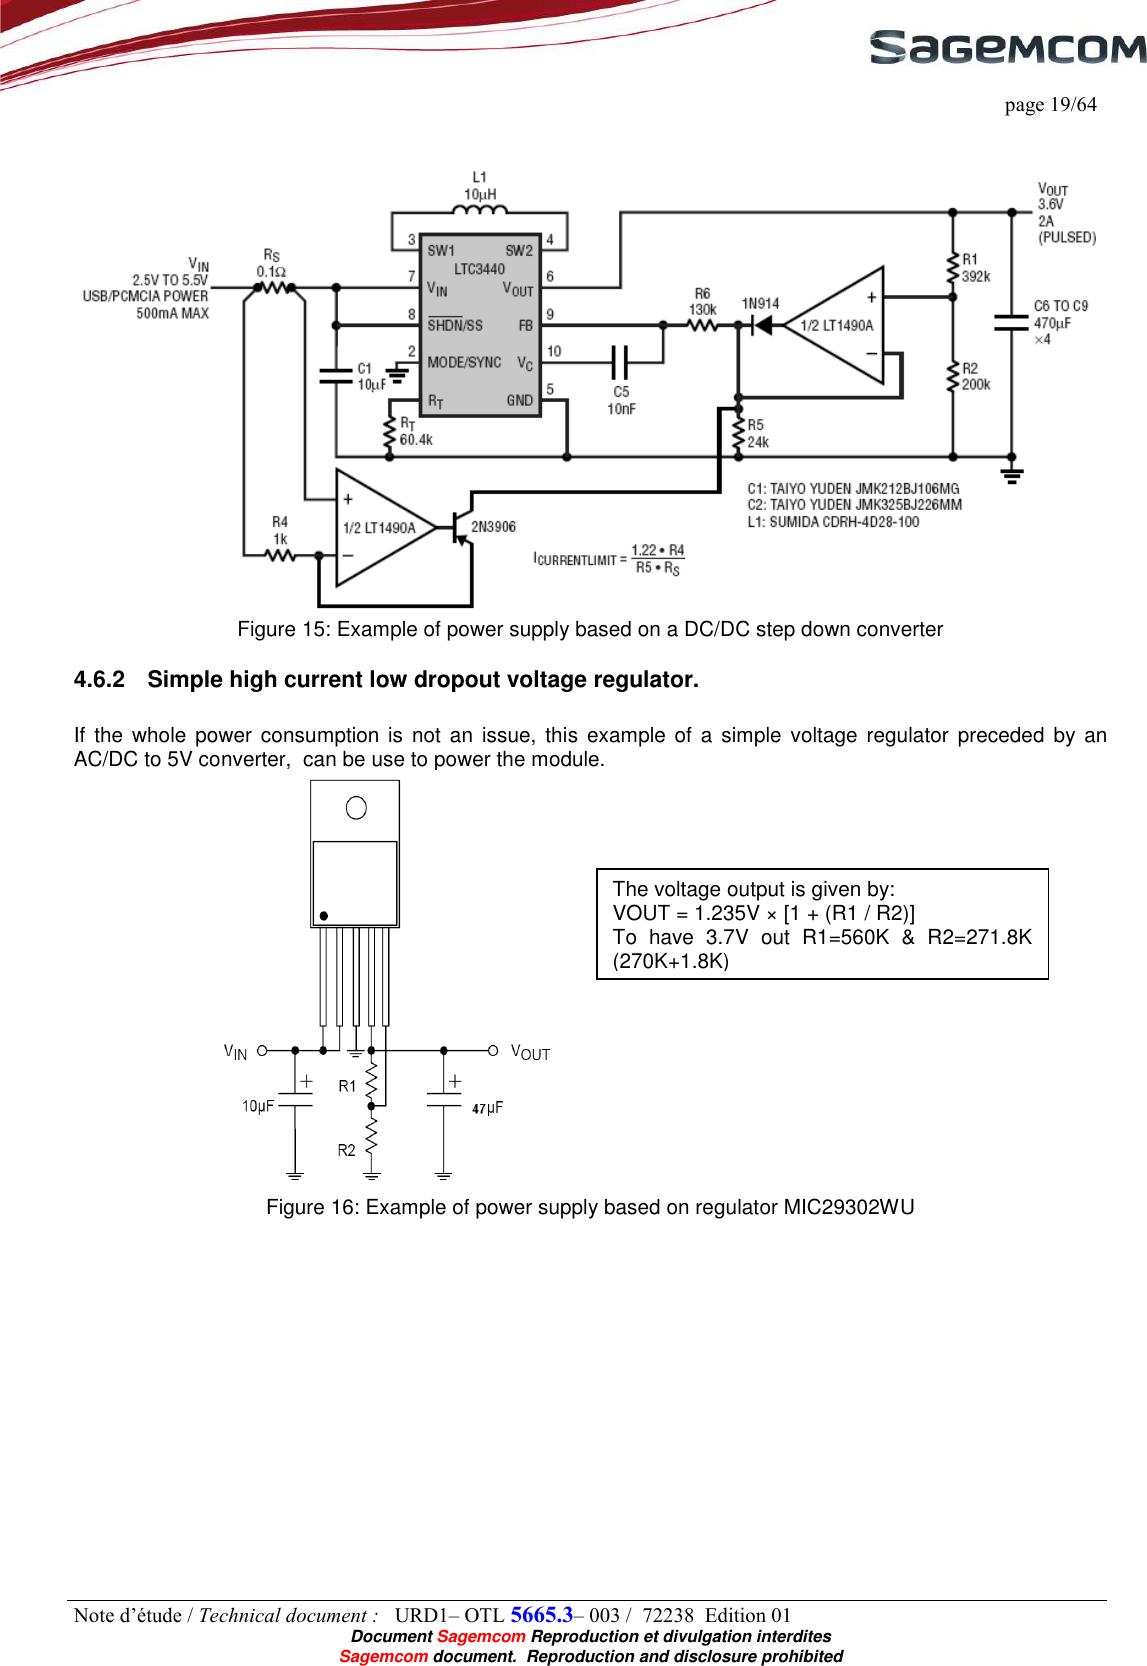     page 19/64 Note d’étude / Technical document :   URD1– OTL 5665.3– 003 /  72238  Edition 01  Document Sagemcom Reproduction et divulgation interdites Sagemcom document.  Reproduction and disclosure prohibited    Figure 15: Example of power supply based on a DC/DC step down converter 4.6.2  Simple high current low dropout voltage regulator.  If the  whole power  consumption is not  an  issue,  this example of a simple voltage  regulator  preceded by  an AC/DC to 5V converter,  can be use to power the module.  Figure 16: Example of power supply based on regulator MIC29302WU  The voltage output is given by:  VOUT = 1.235V × [1 + (R1 / R2)] To  have  3.7V  out  R1=560K  &amp;  R2=271.8K (270K+1.8K) 